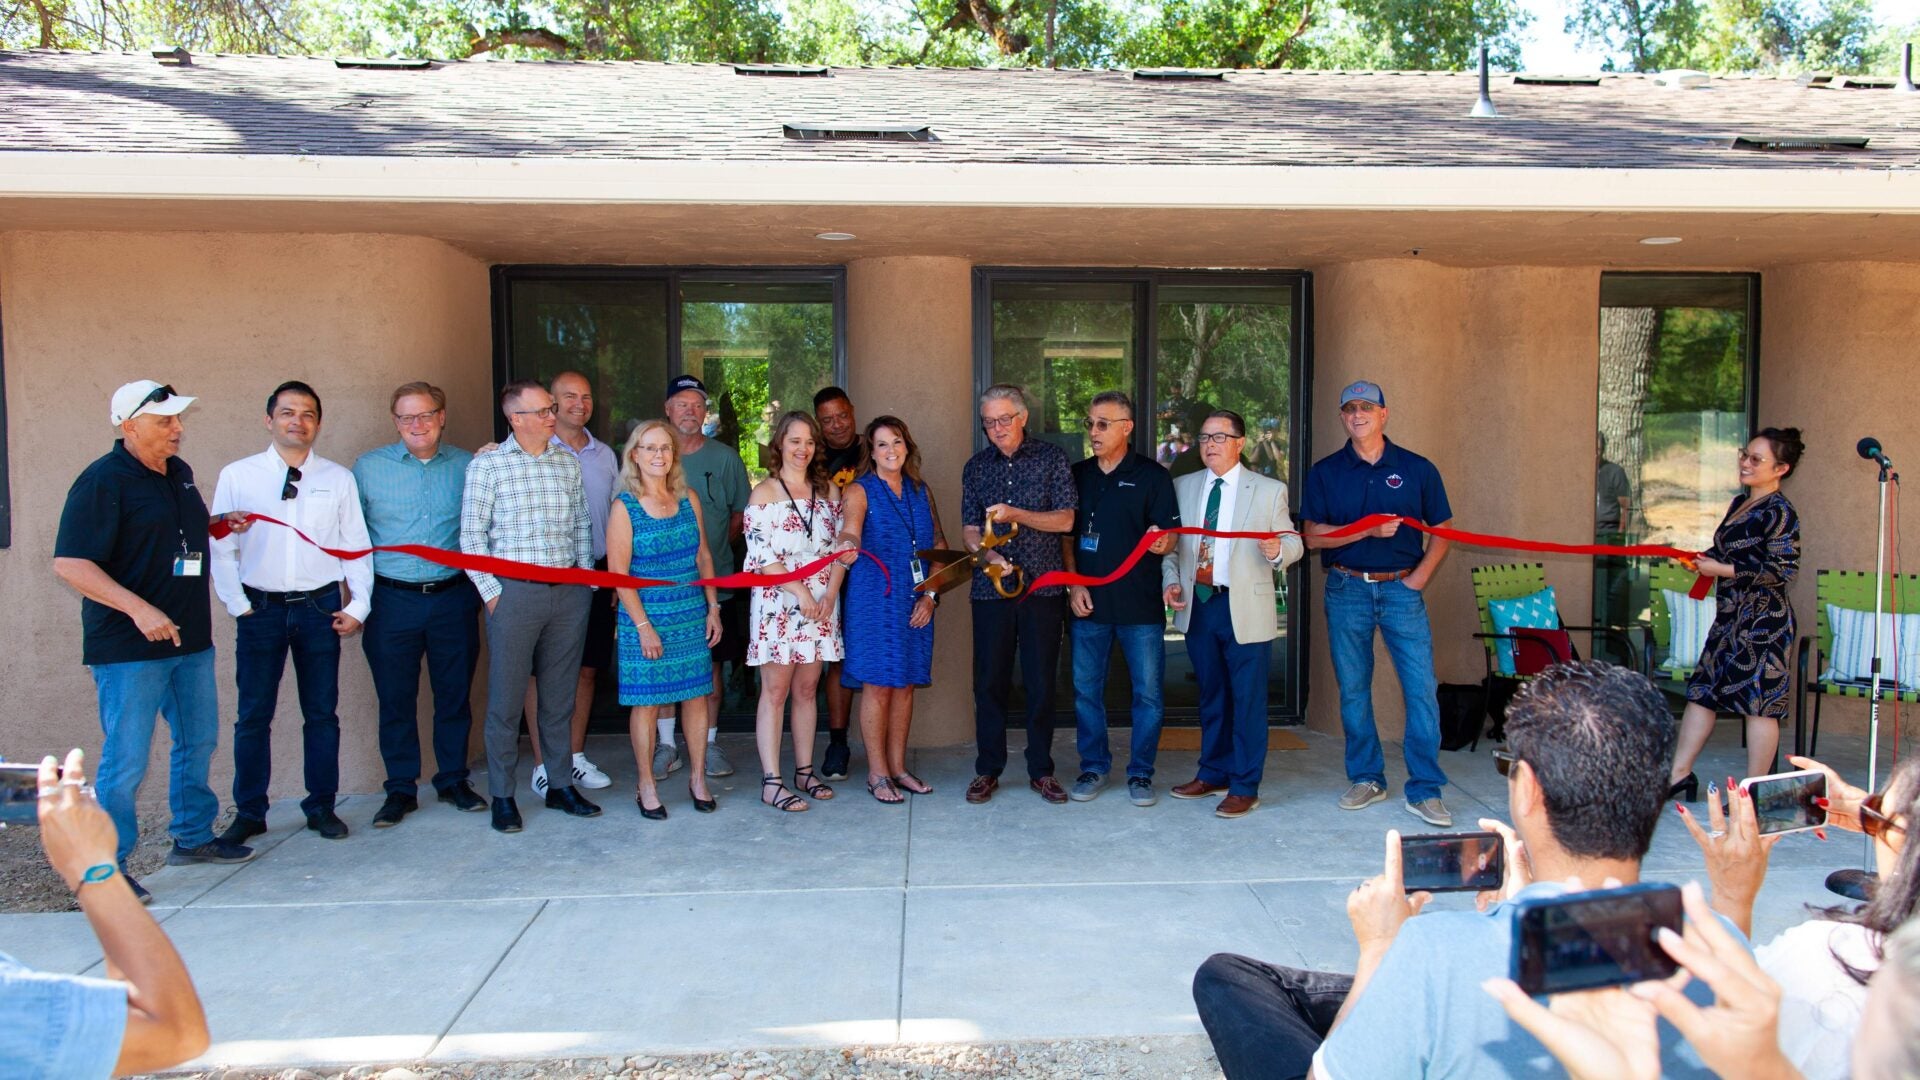 Ribbon cutting at inauguration of California’s first 3D printed house